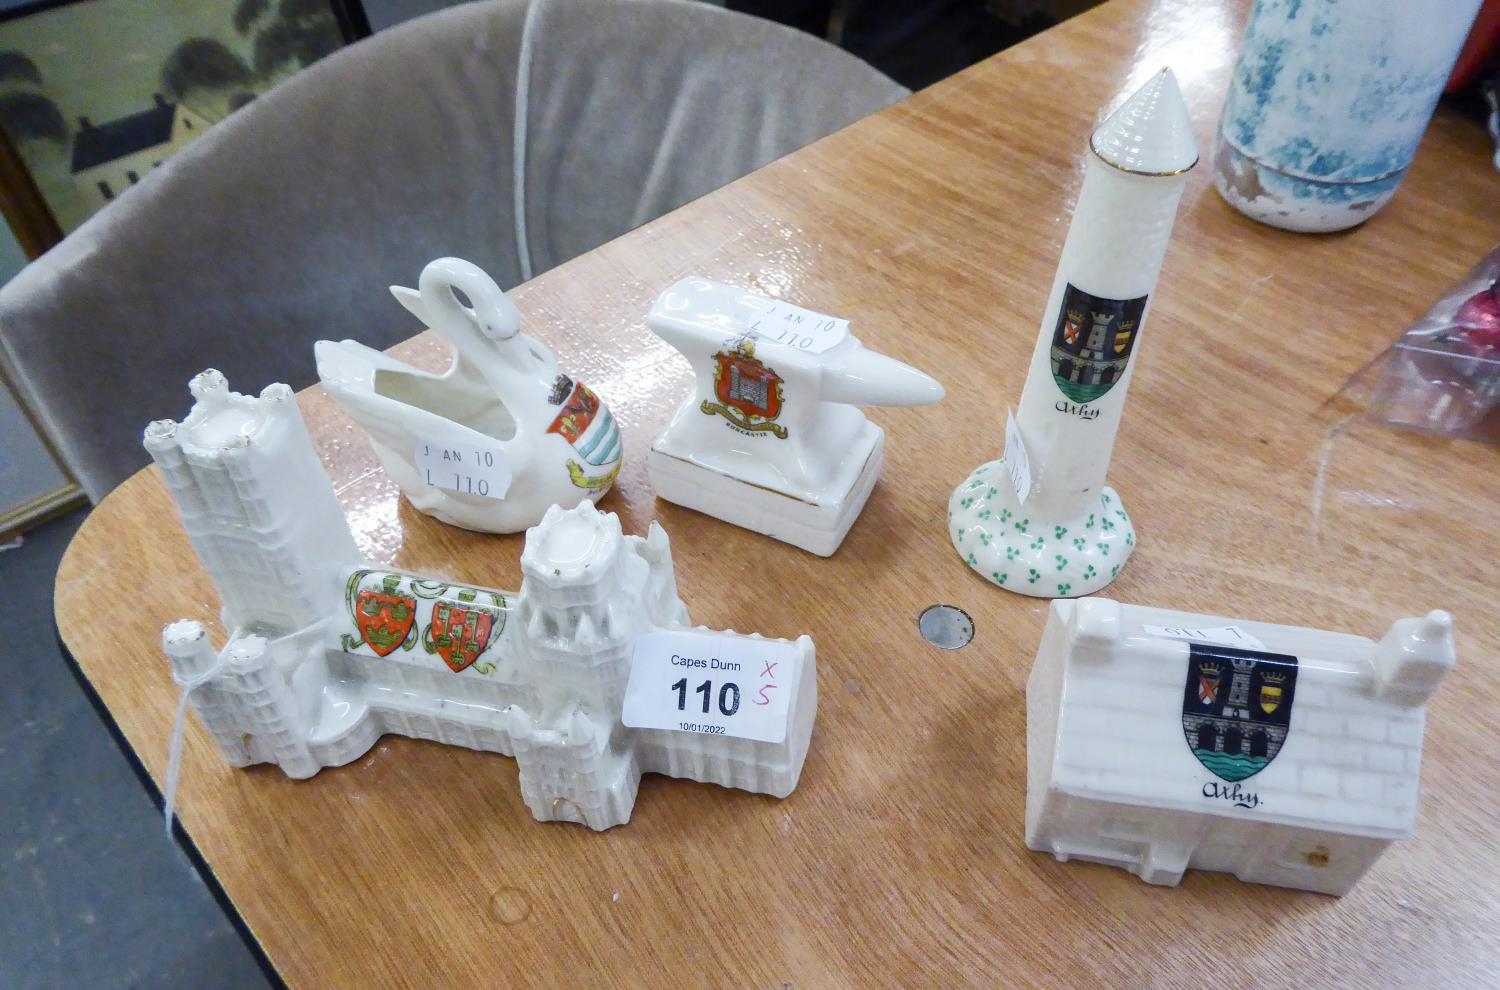 ARCADIAN CHINA SOUVENIR OF ELY IN THE FORM OF ELY CATHEDRAL WITH THE CRESTS OF 'ELY PRIORY' AND 'SEE